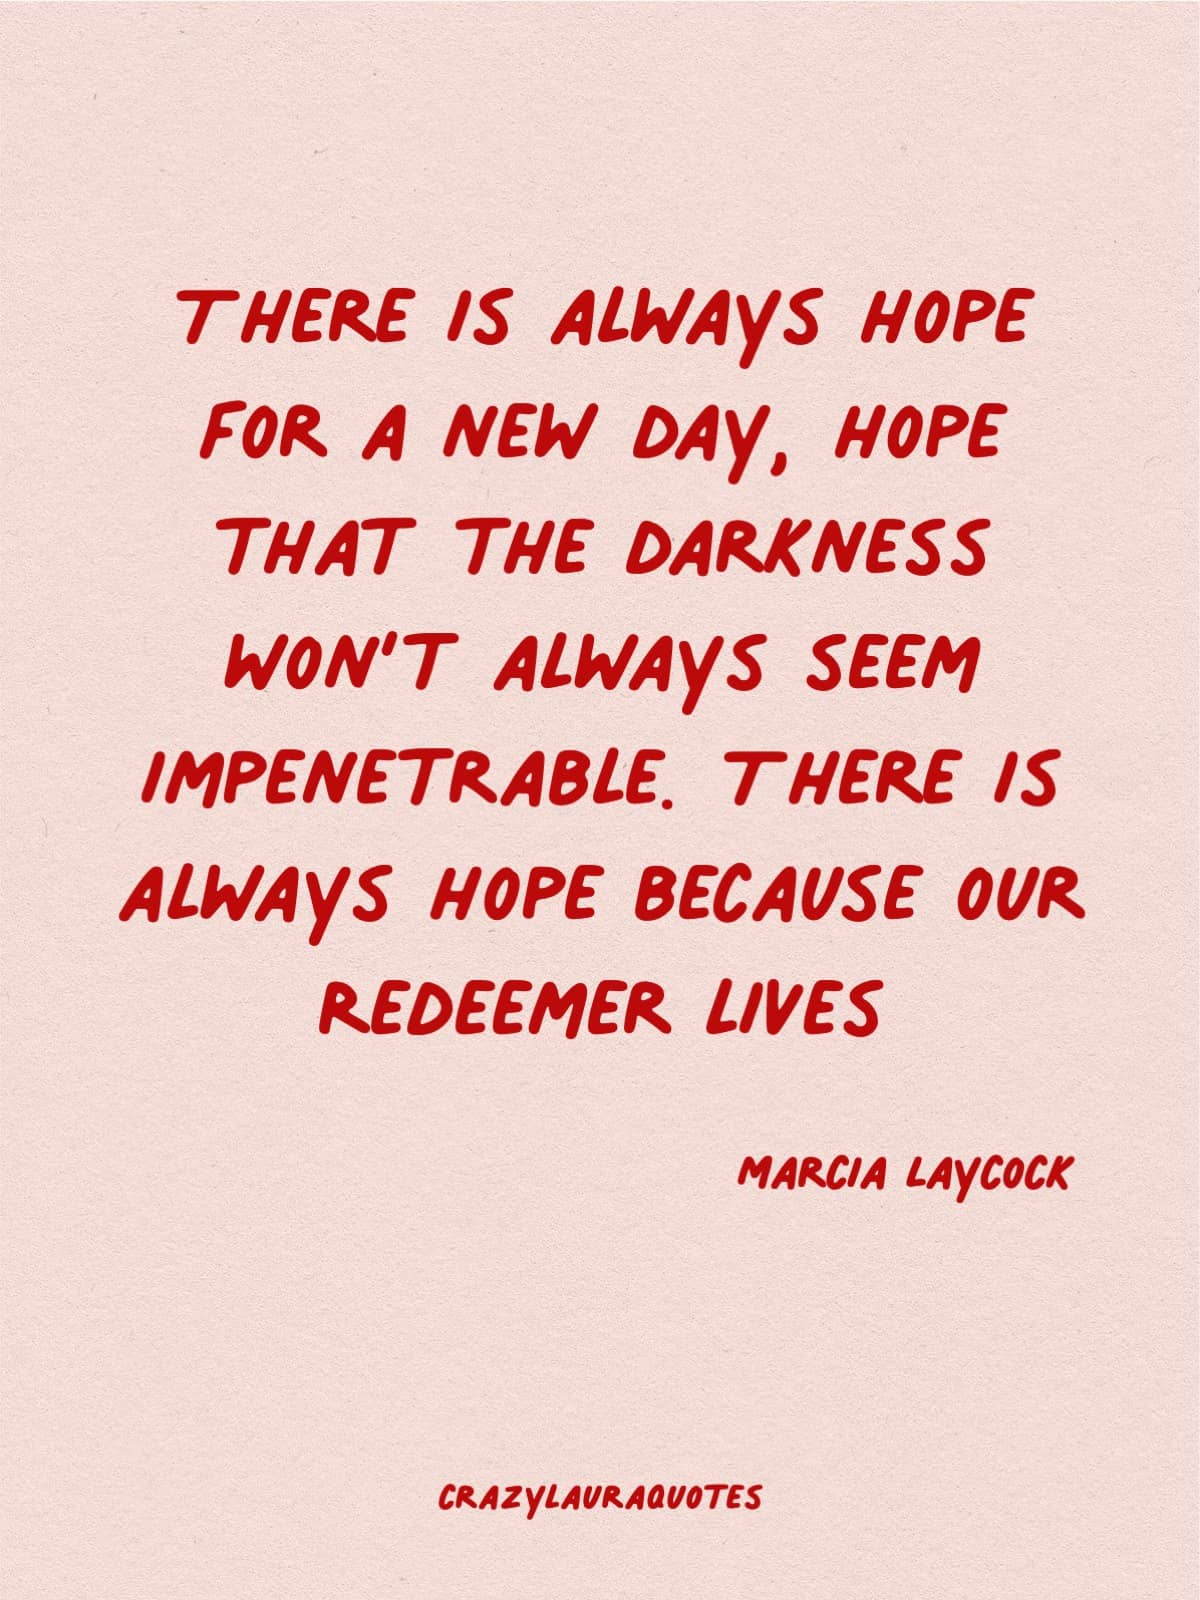 life qoute about hope